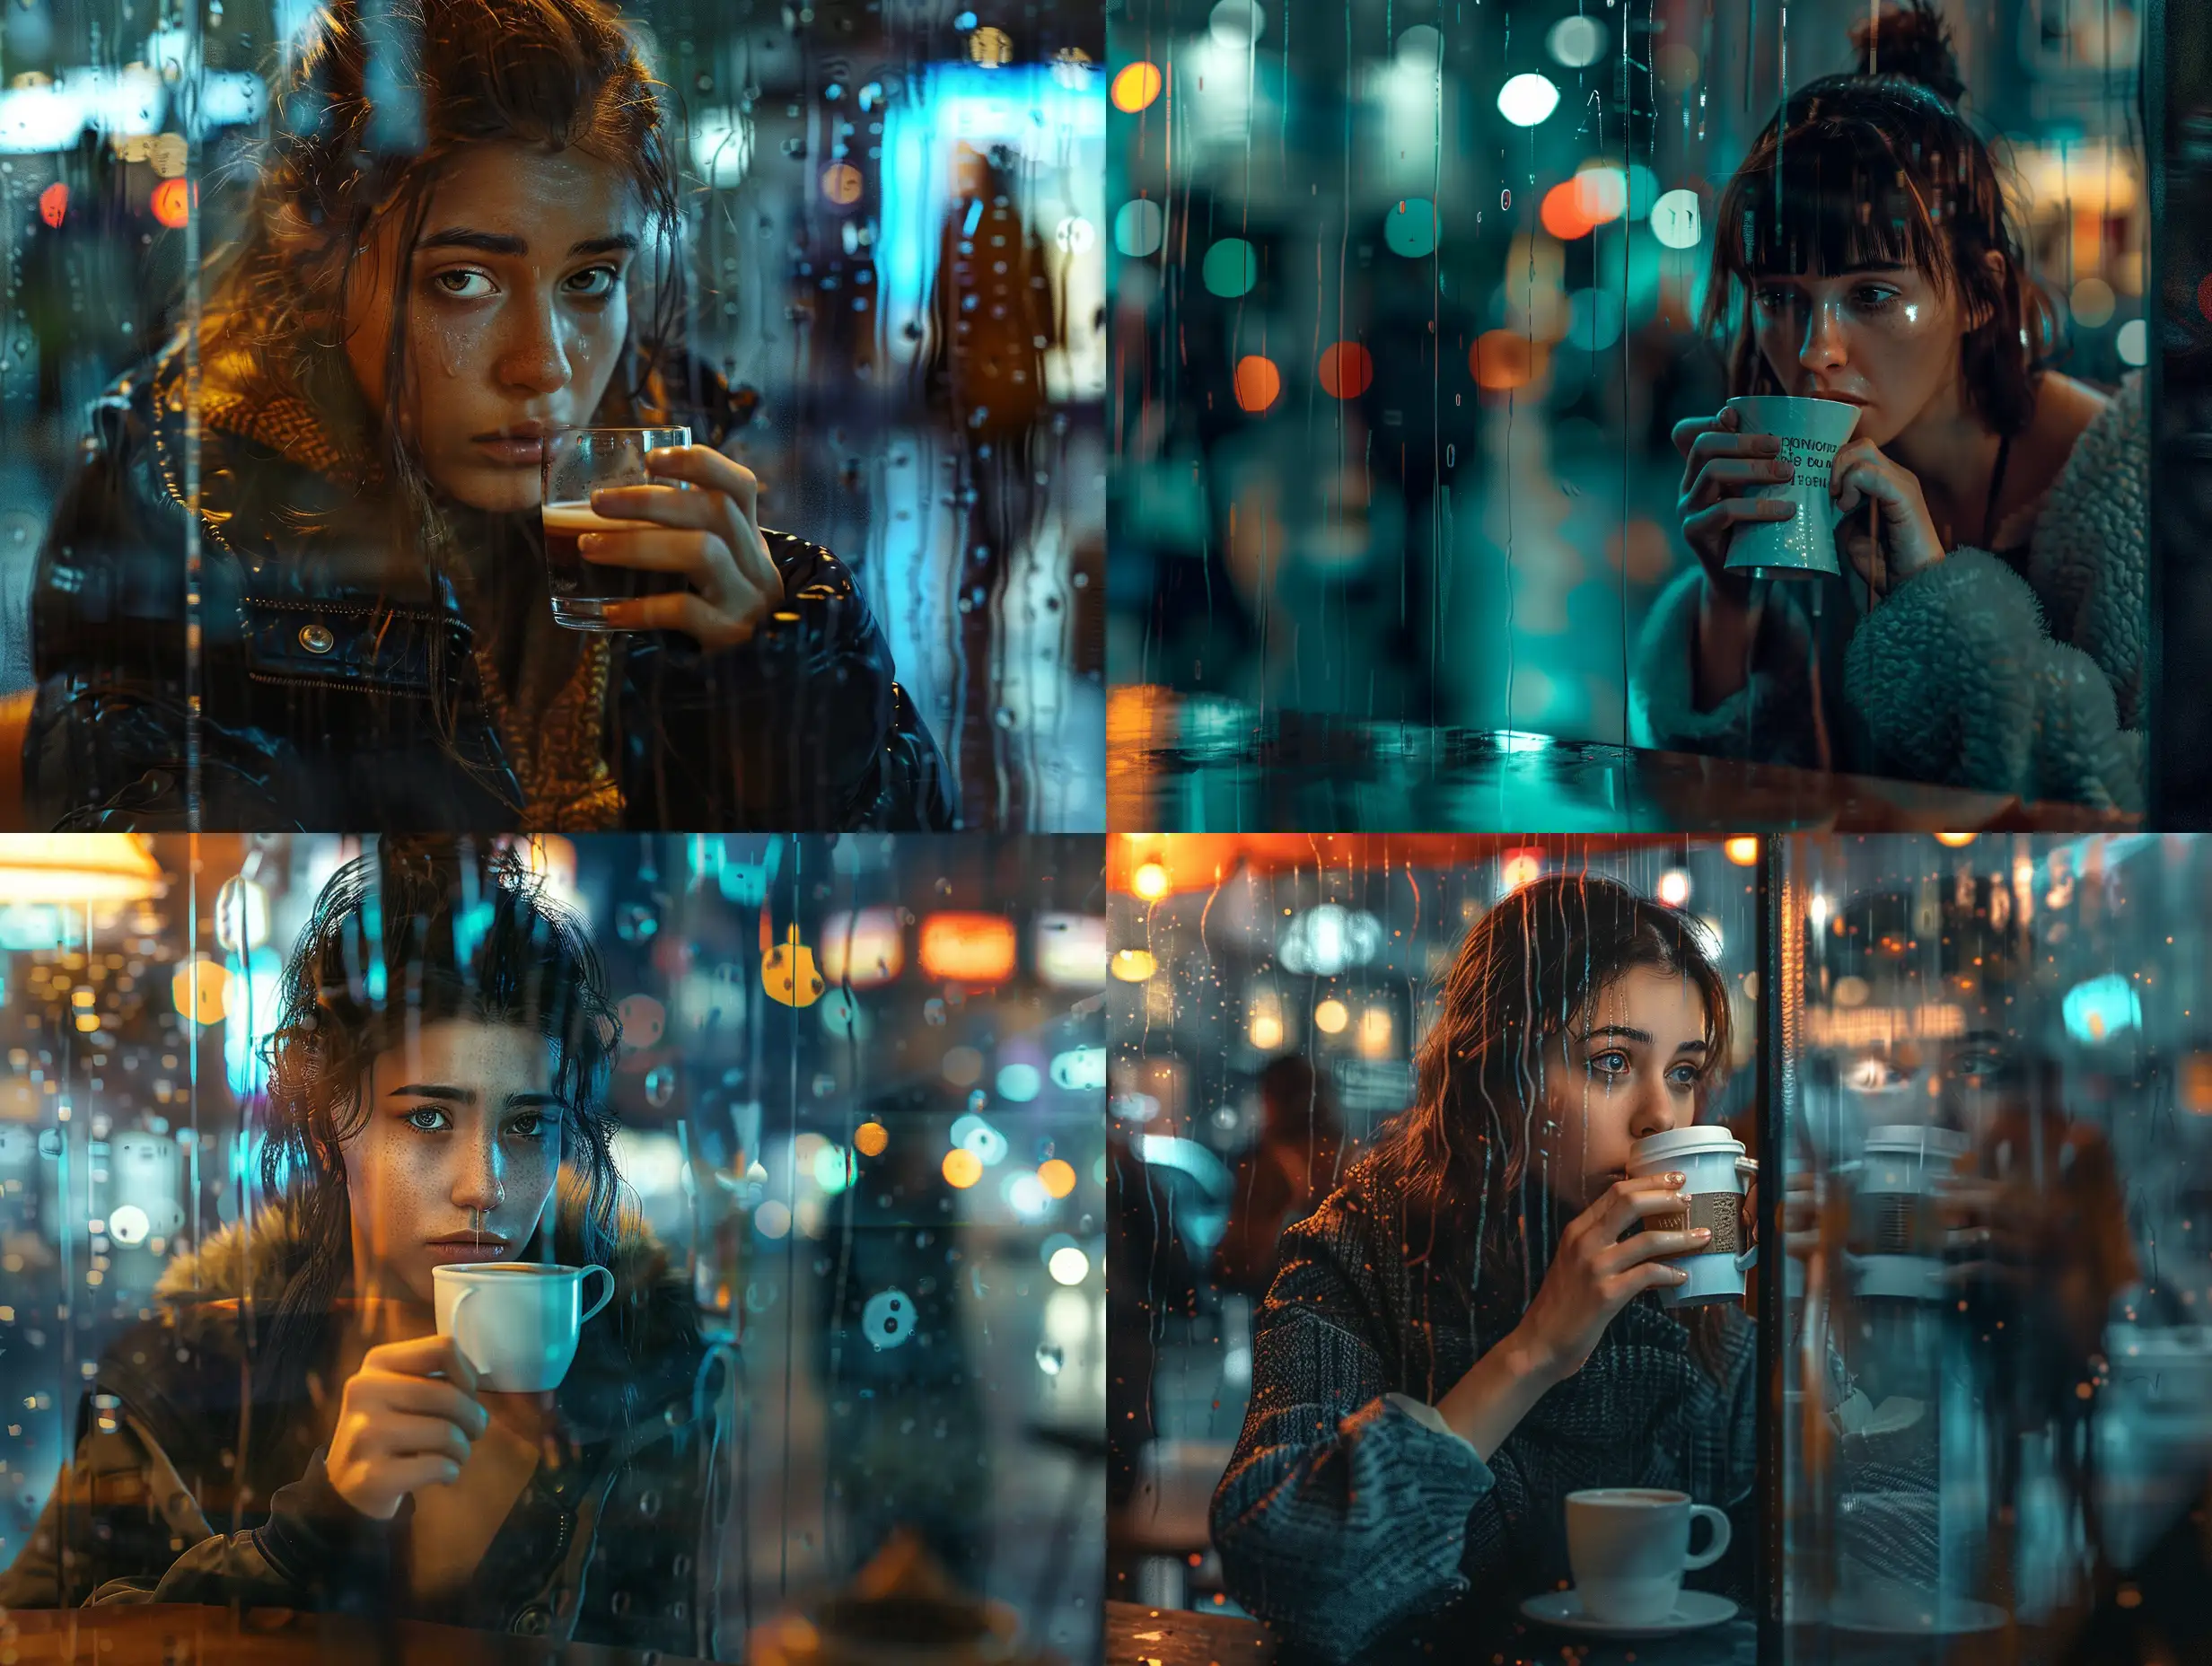 A girl in a cafe sips her coffee and looks at passers-by from behind the glass with sad looks on a rainy night, Portrait, Realism, Keyshot, Normal perspective, Mirrorless Camera, Cinematic Lighting, Delight,